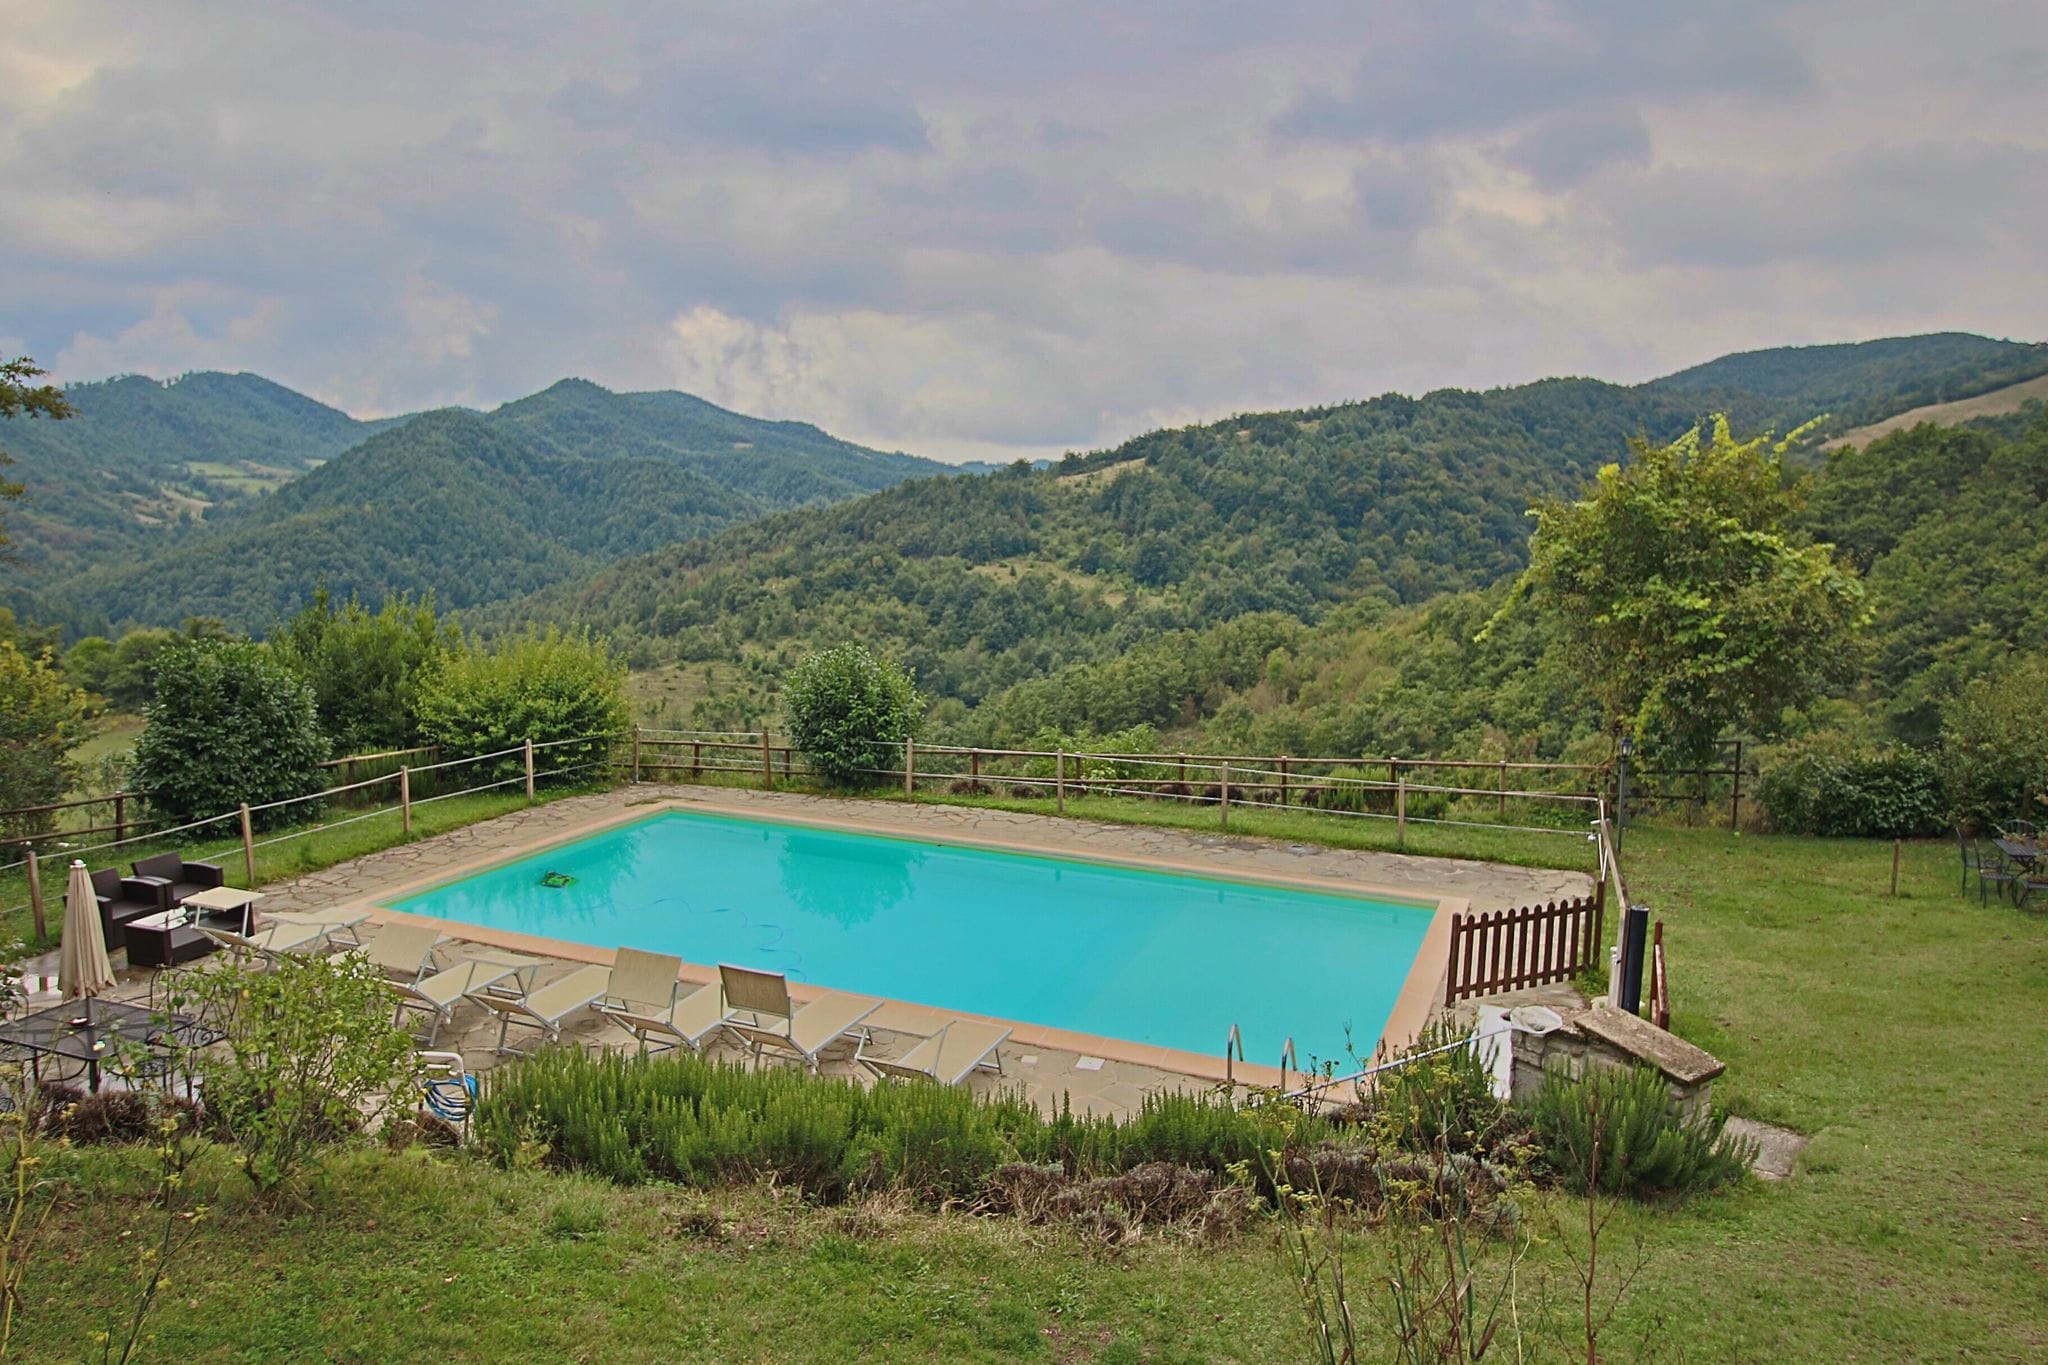 Farmhouse with pool in the hills, beautiful views, in the truffle area

